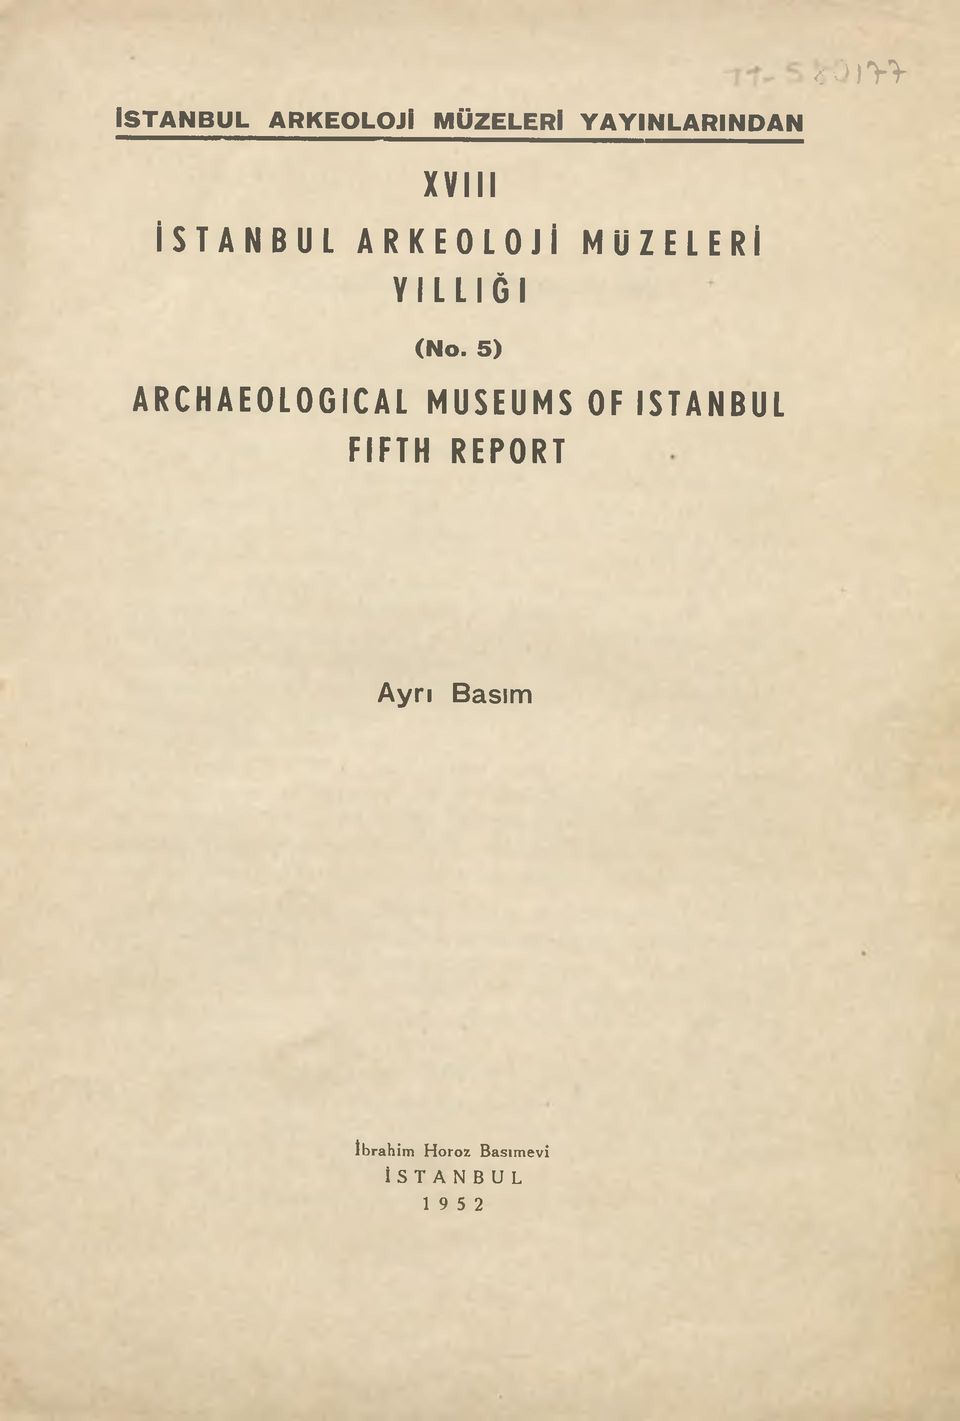 5) ARCHAEOLOGICAL MUSEUMS OF İSTANBUL FIFTH